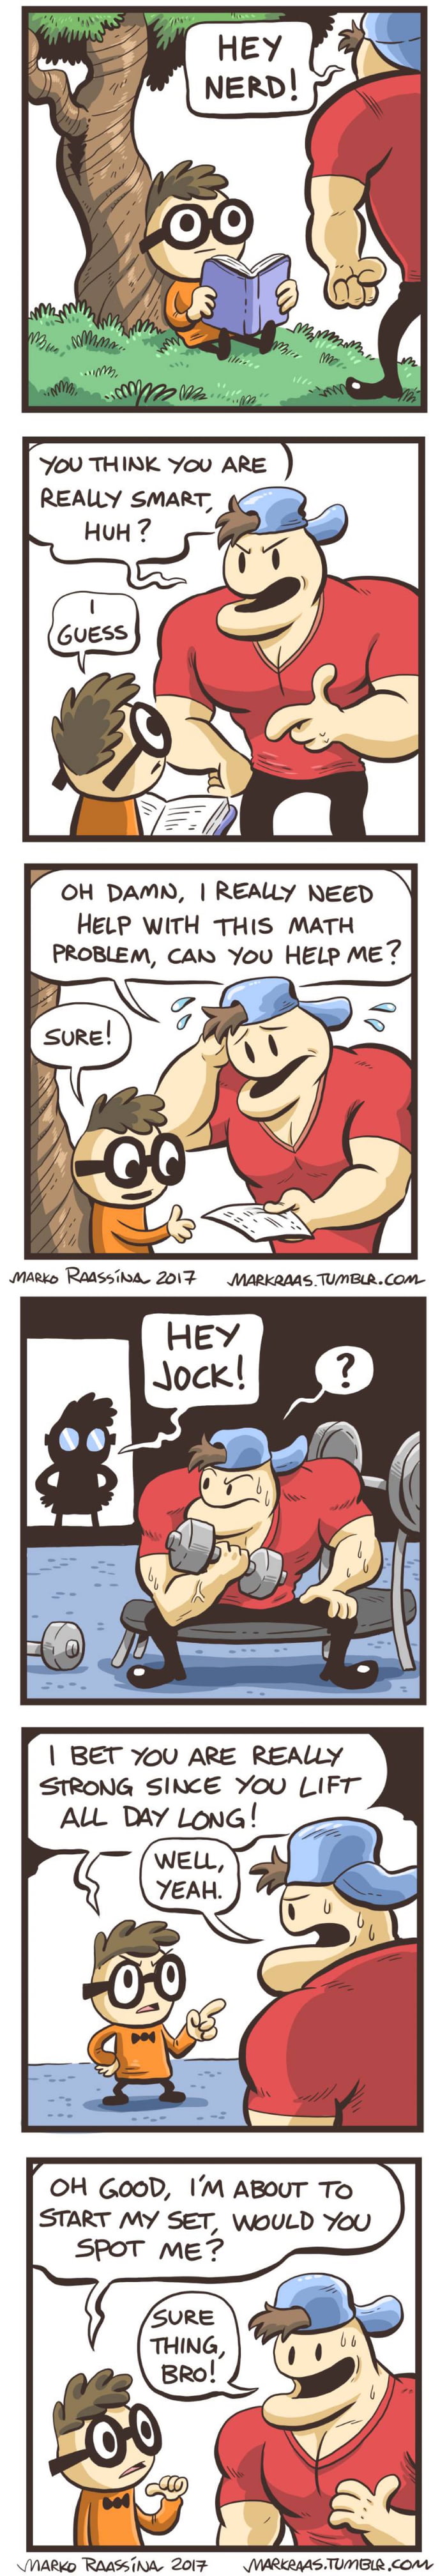 The nerd and the jock ch.1 and 2 Image